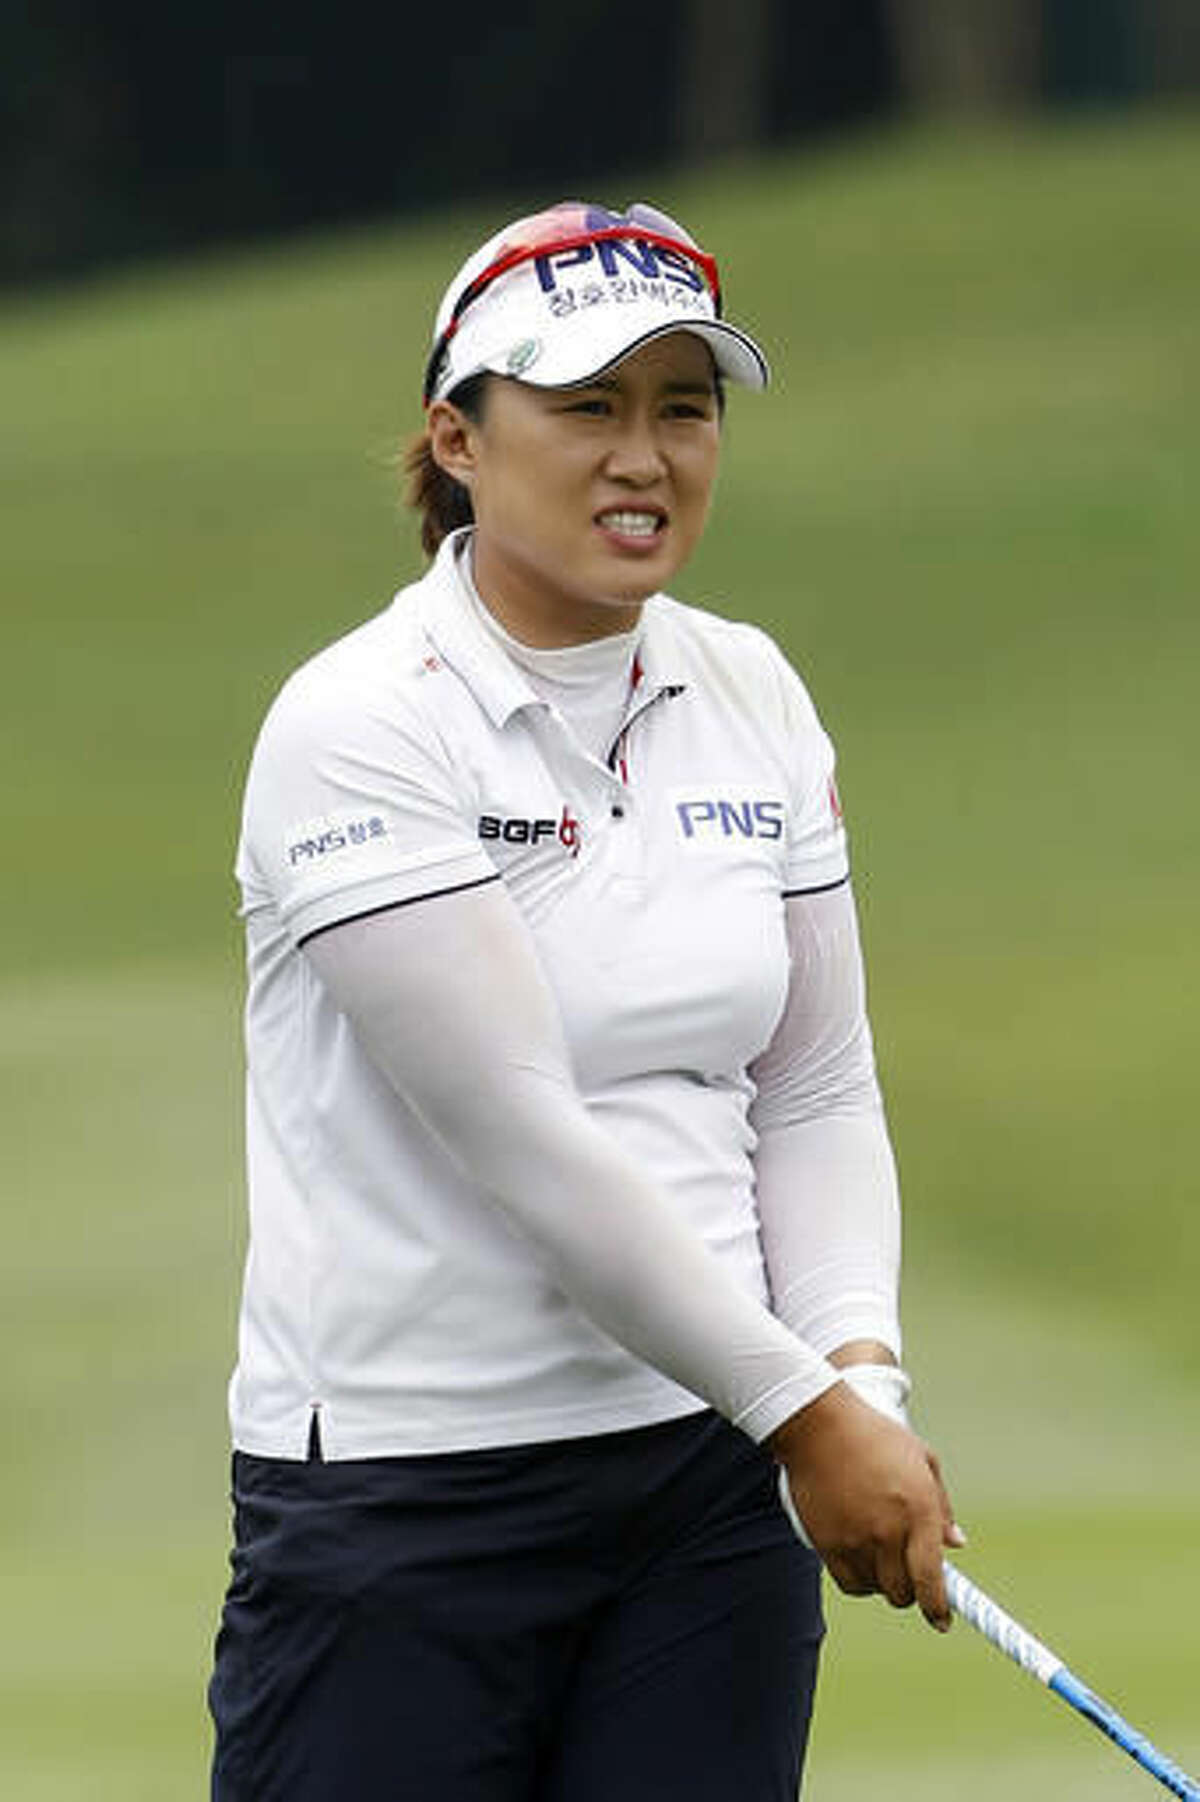 Amy Yang of South Korea reacts after hitting her shot on the 12th hole during the first round of the LPGA golf tournament at Tournament Players Club (TPC) in Kuala Lumpur, Malaysia, Thursday, Oct. 27, 2016. (AP Photo/Joshua Paul)